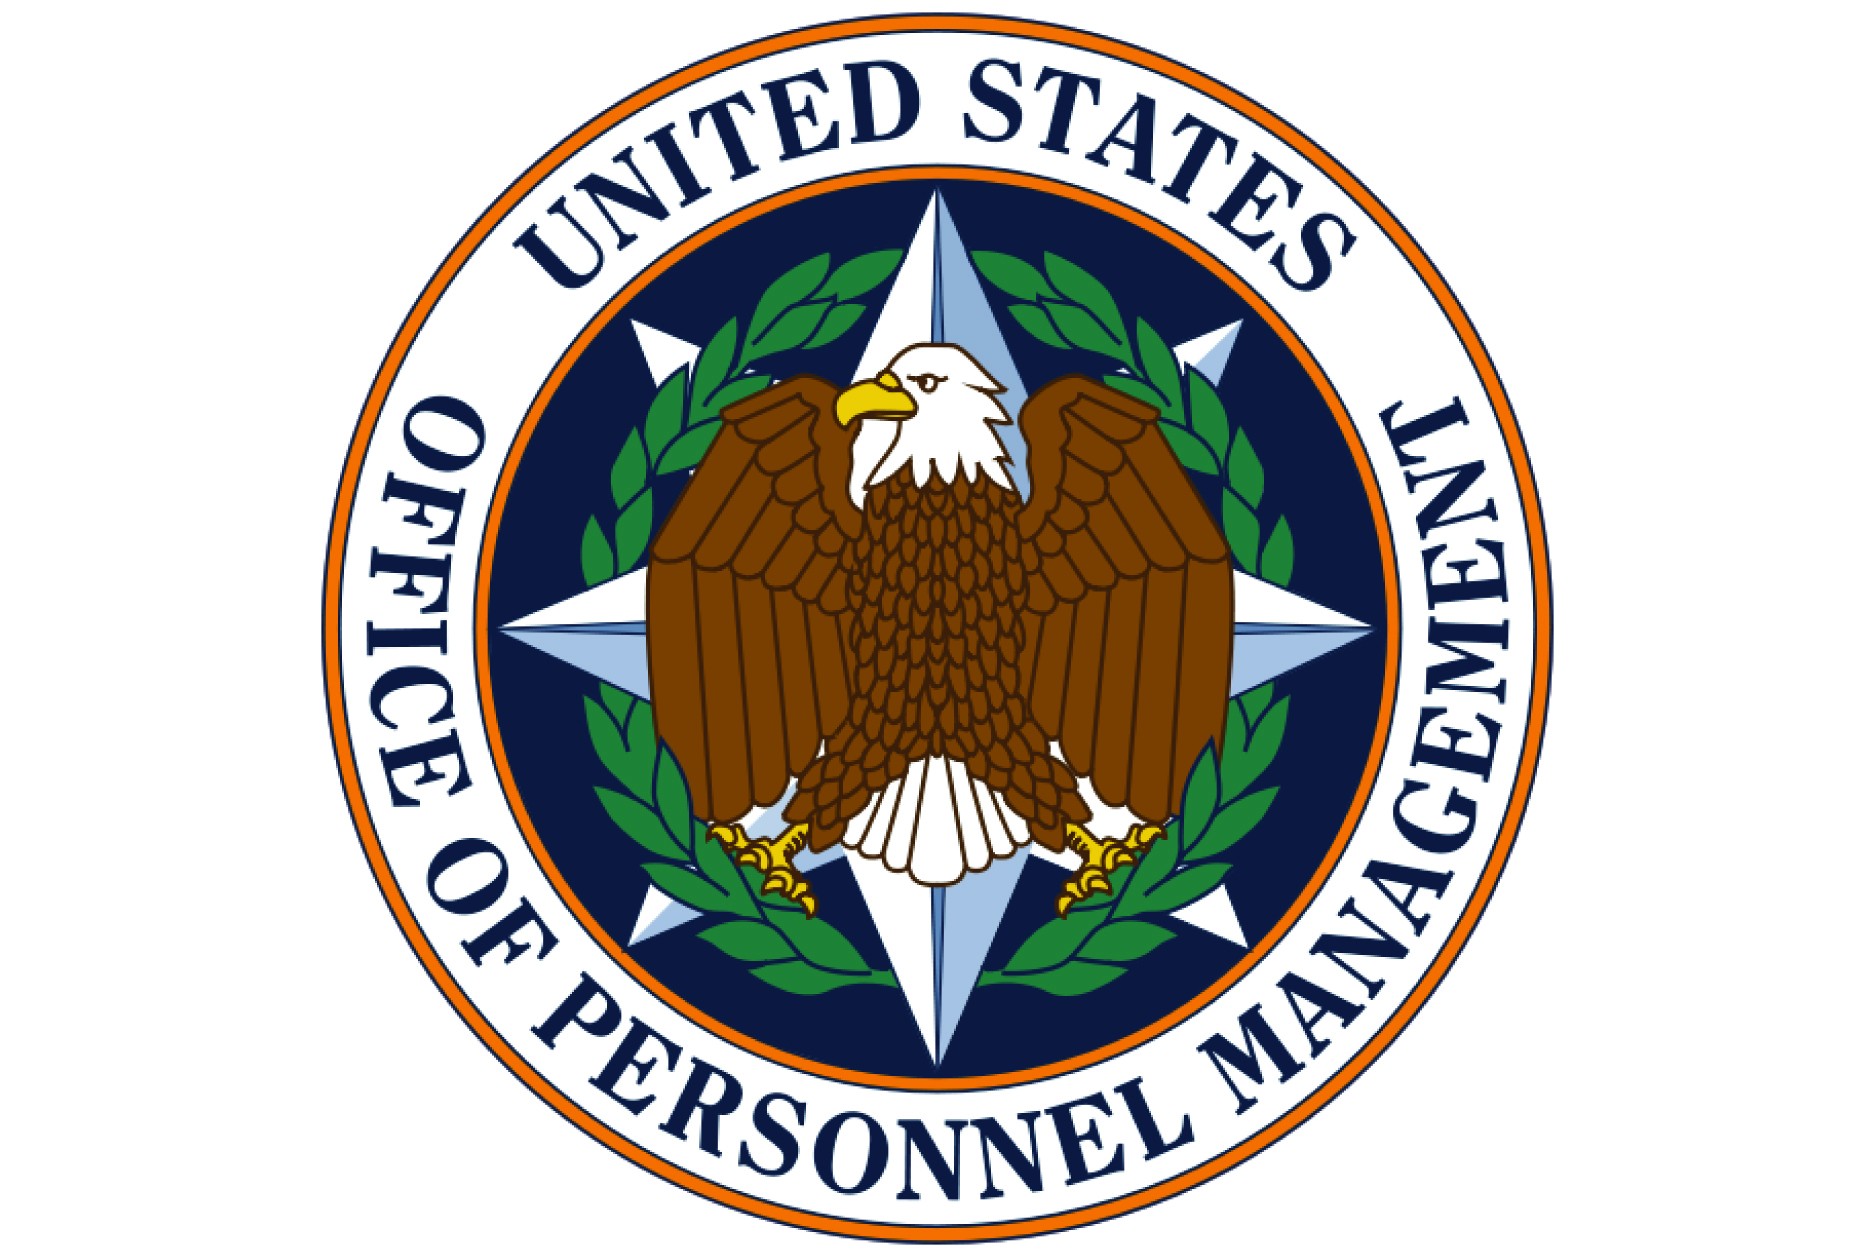 OPM to notify employees of cybersecurity incident Article The United States Army